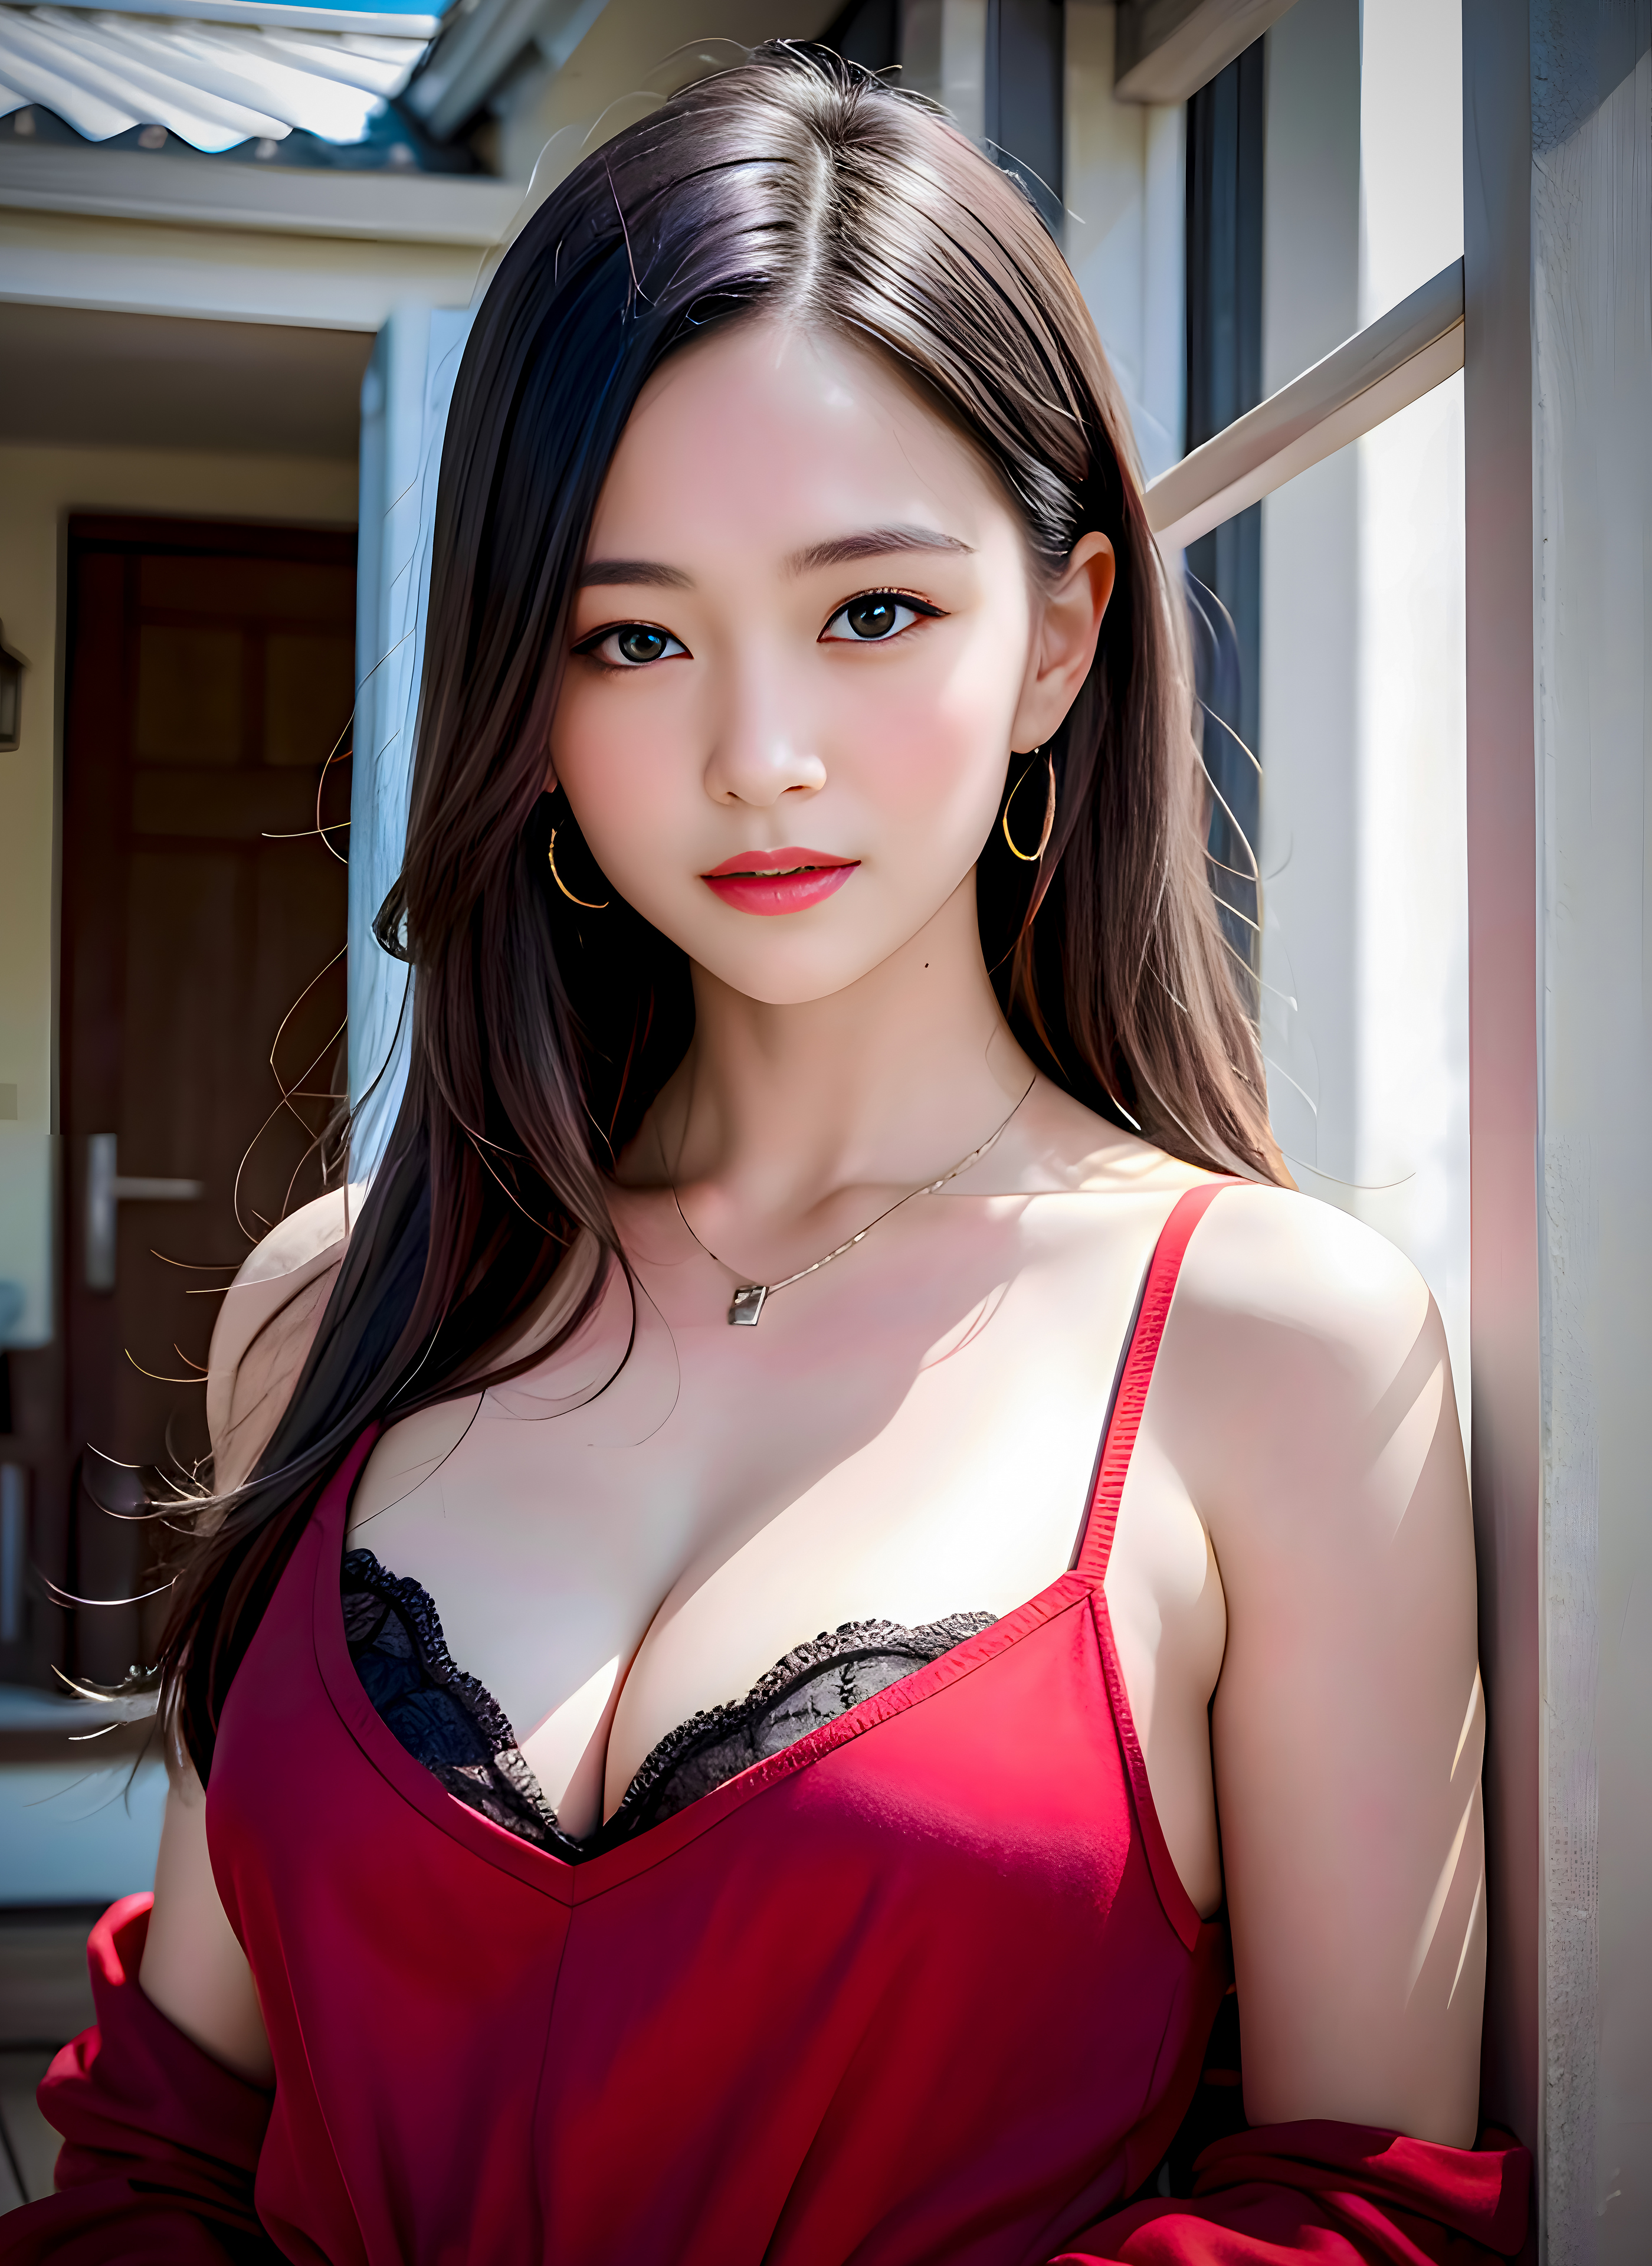 Free photo Asian girl in a red dress and black bra